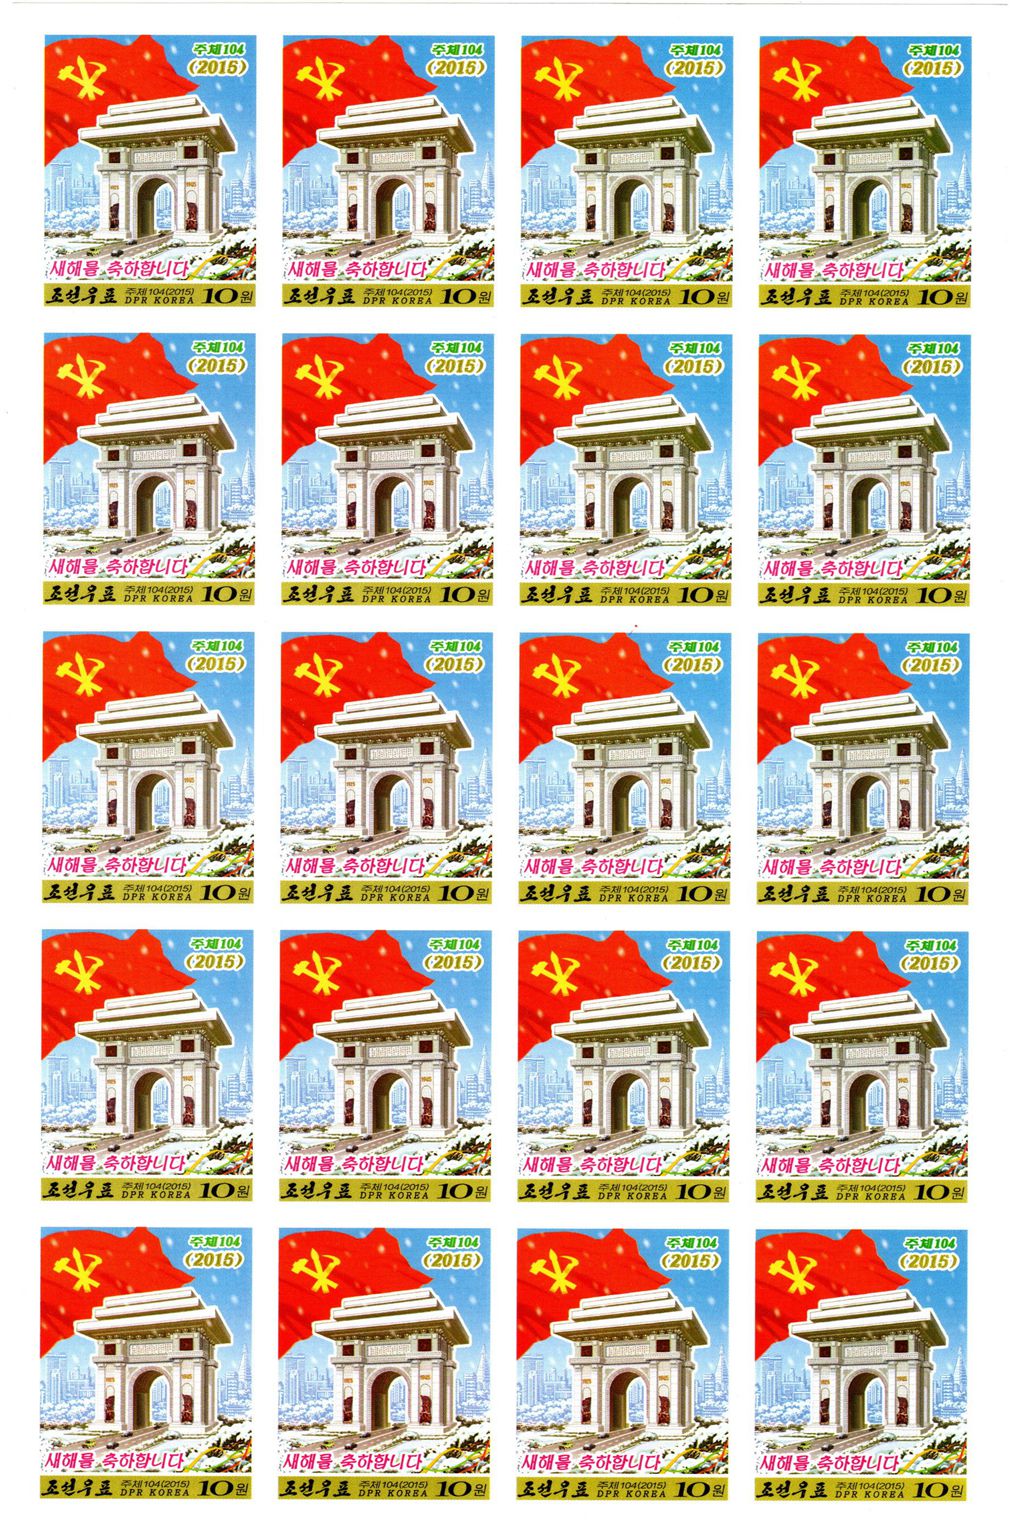 L4607, Korea "Happy New Year", Sheets of 20 Pcs Stamps, 2015 Imperforate